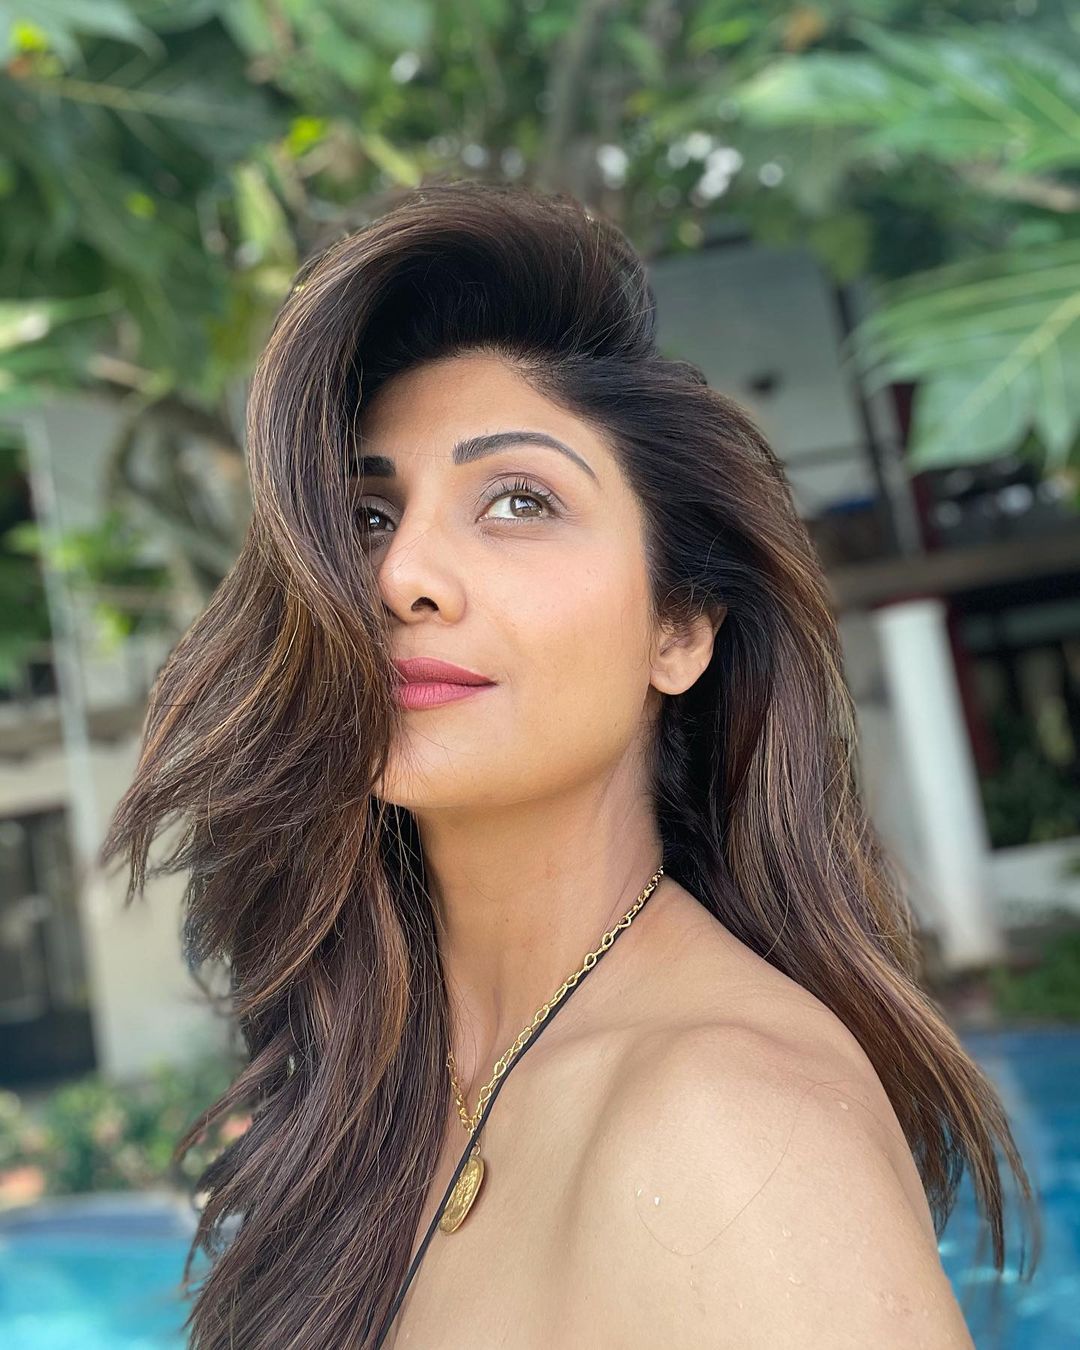 List of awards and nominations received by Shilpa Shetty - Wikipedia